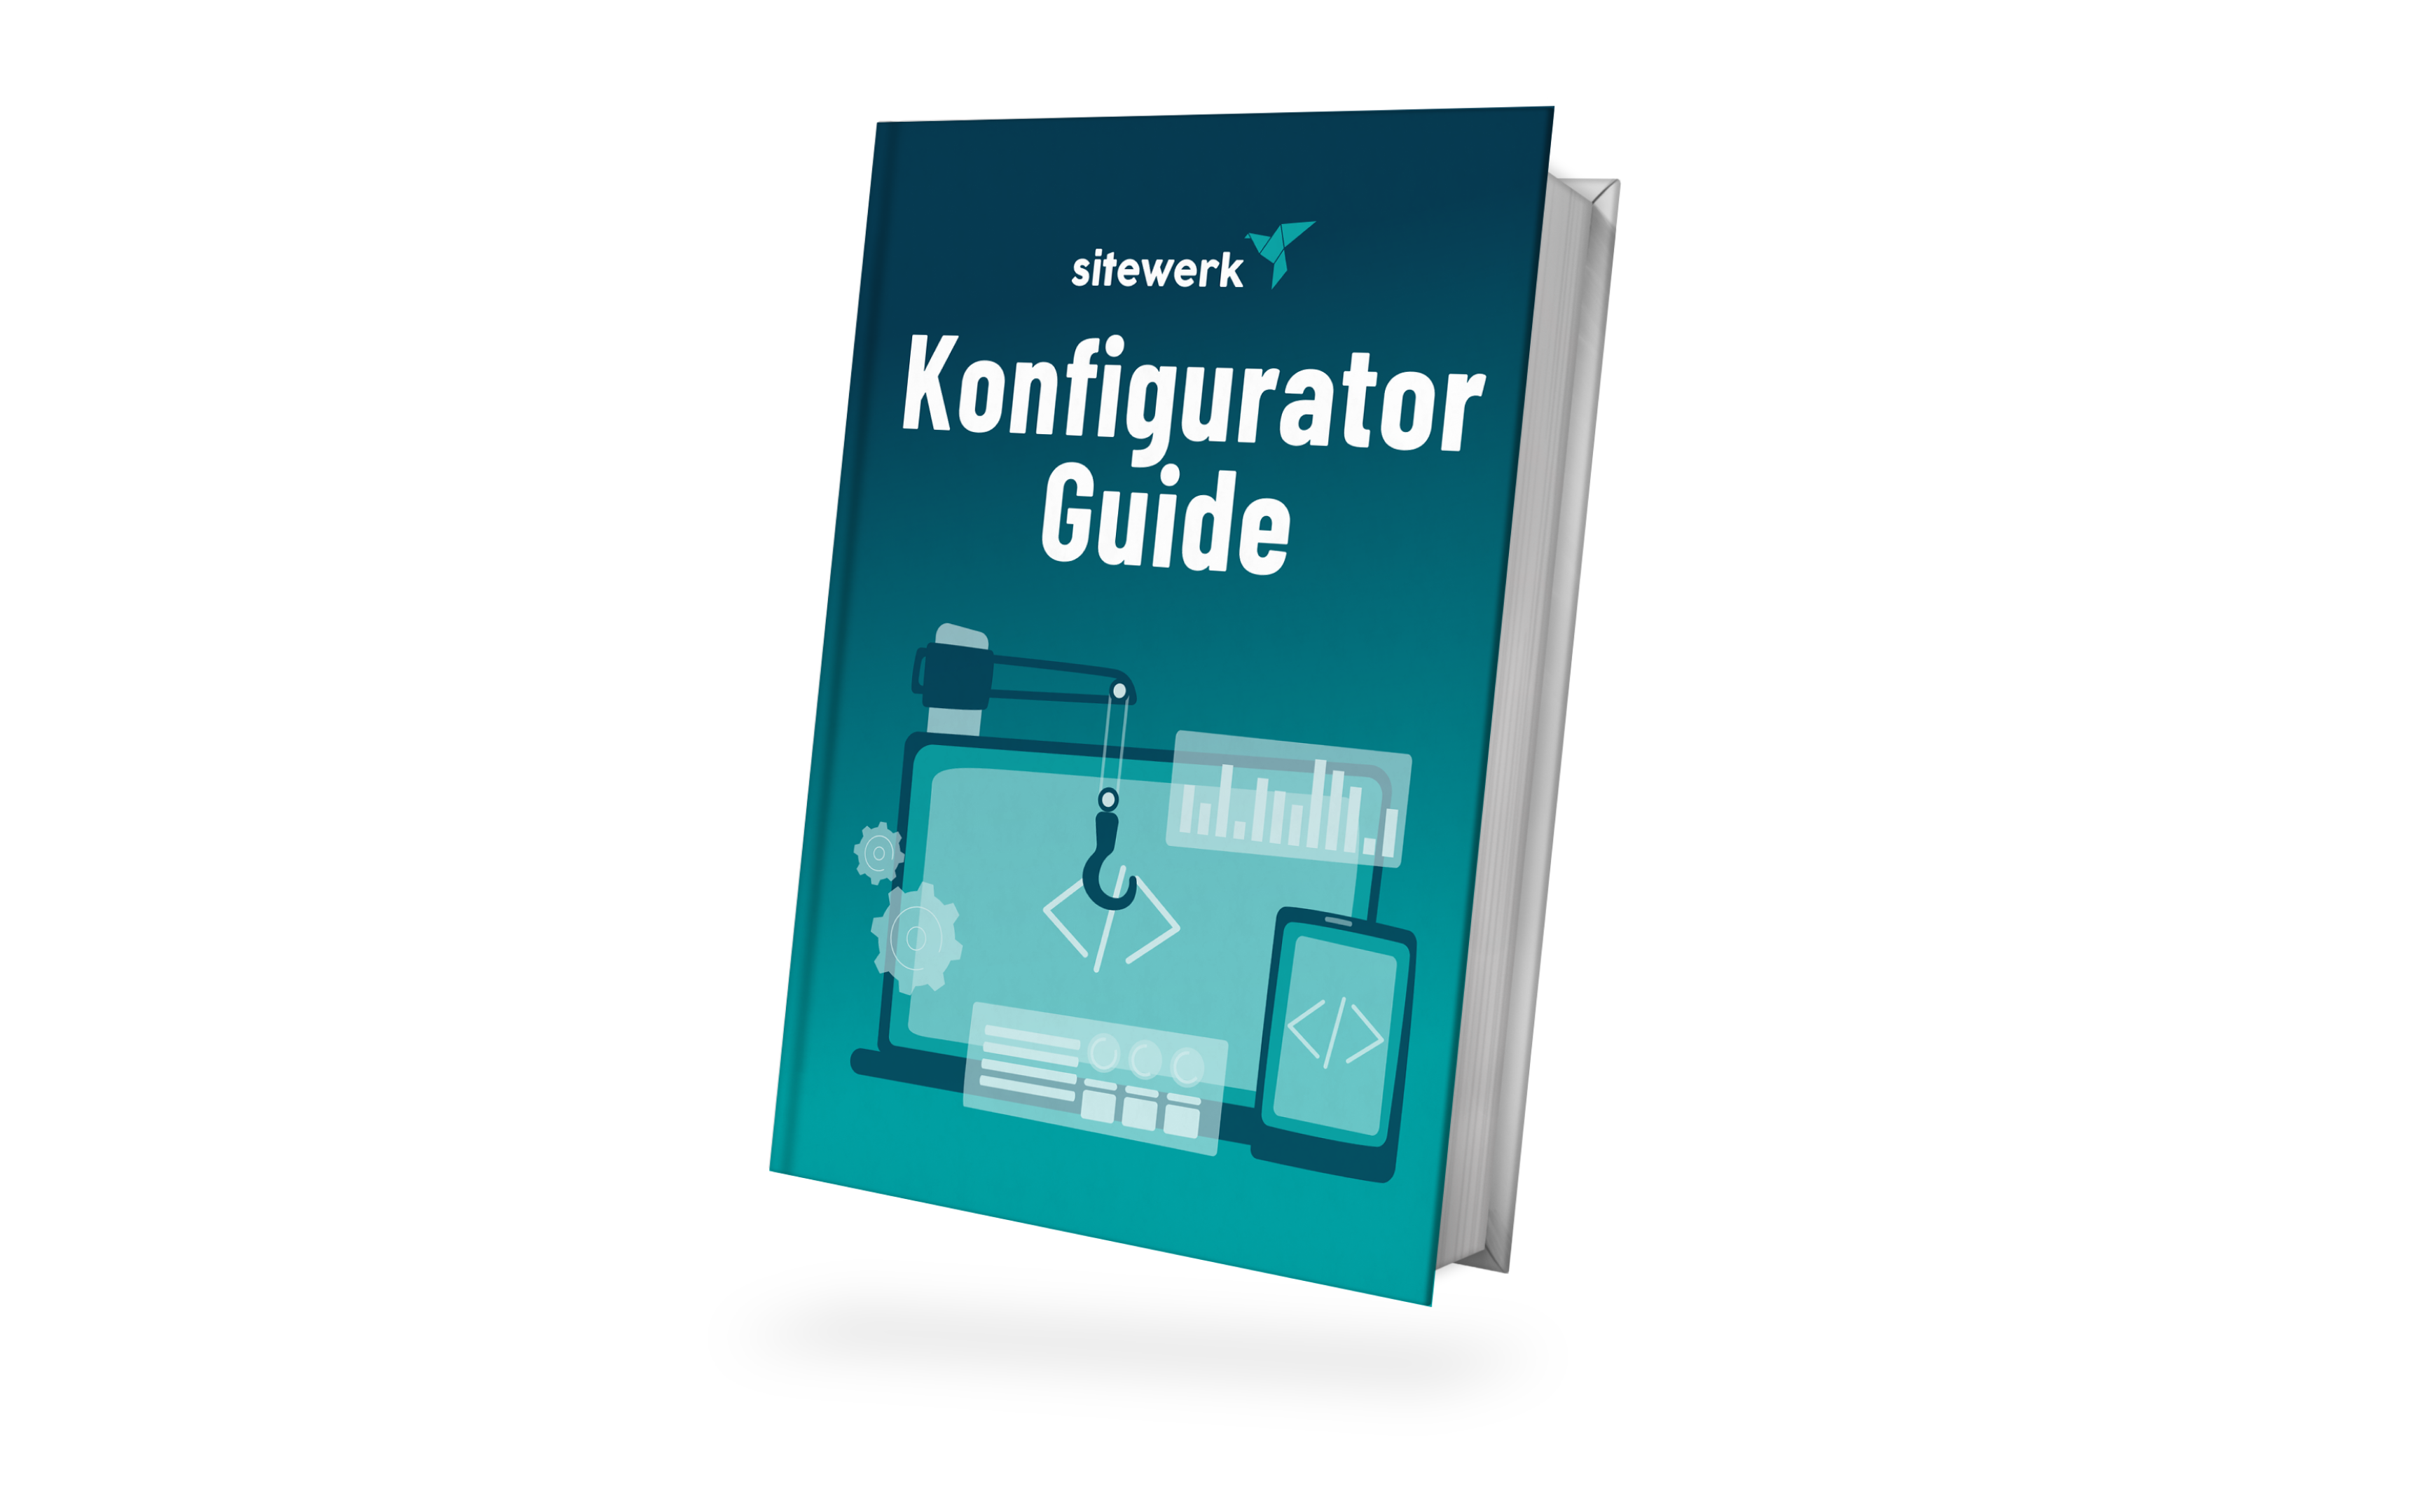 Image of the configurator guide